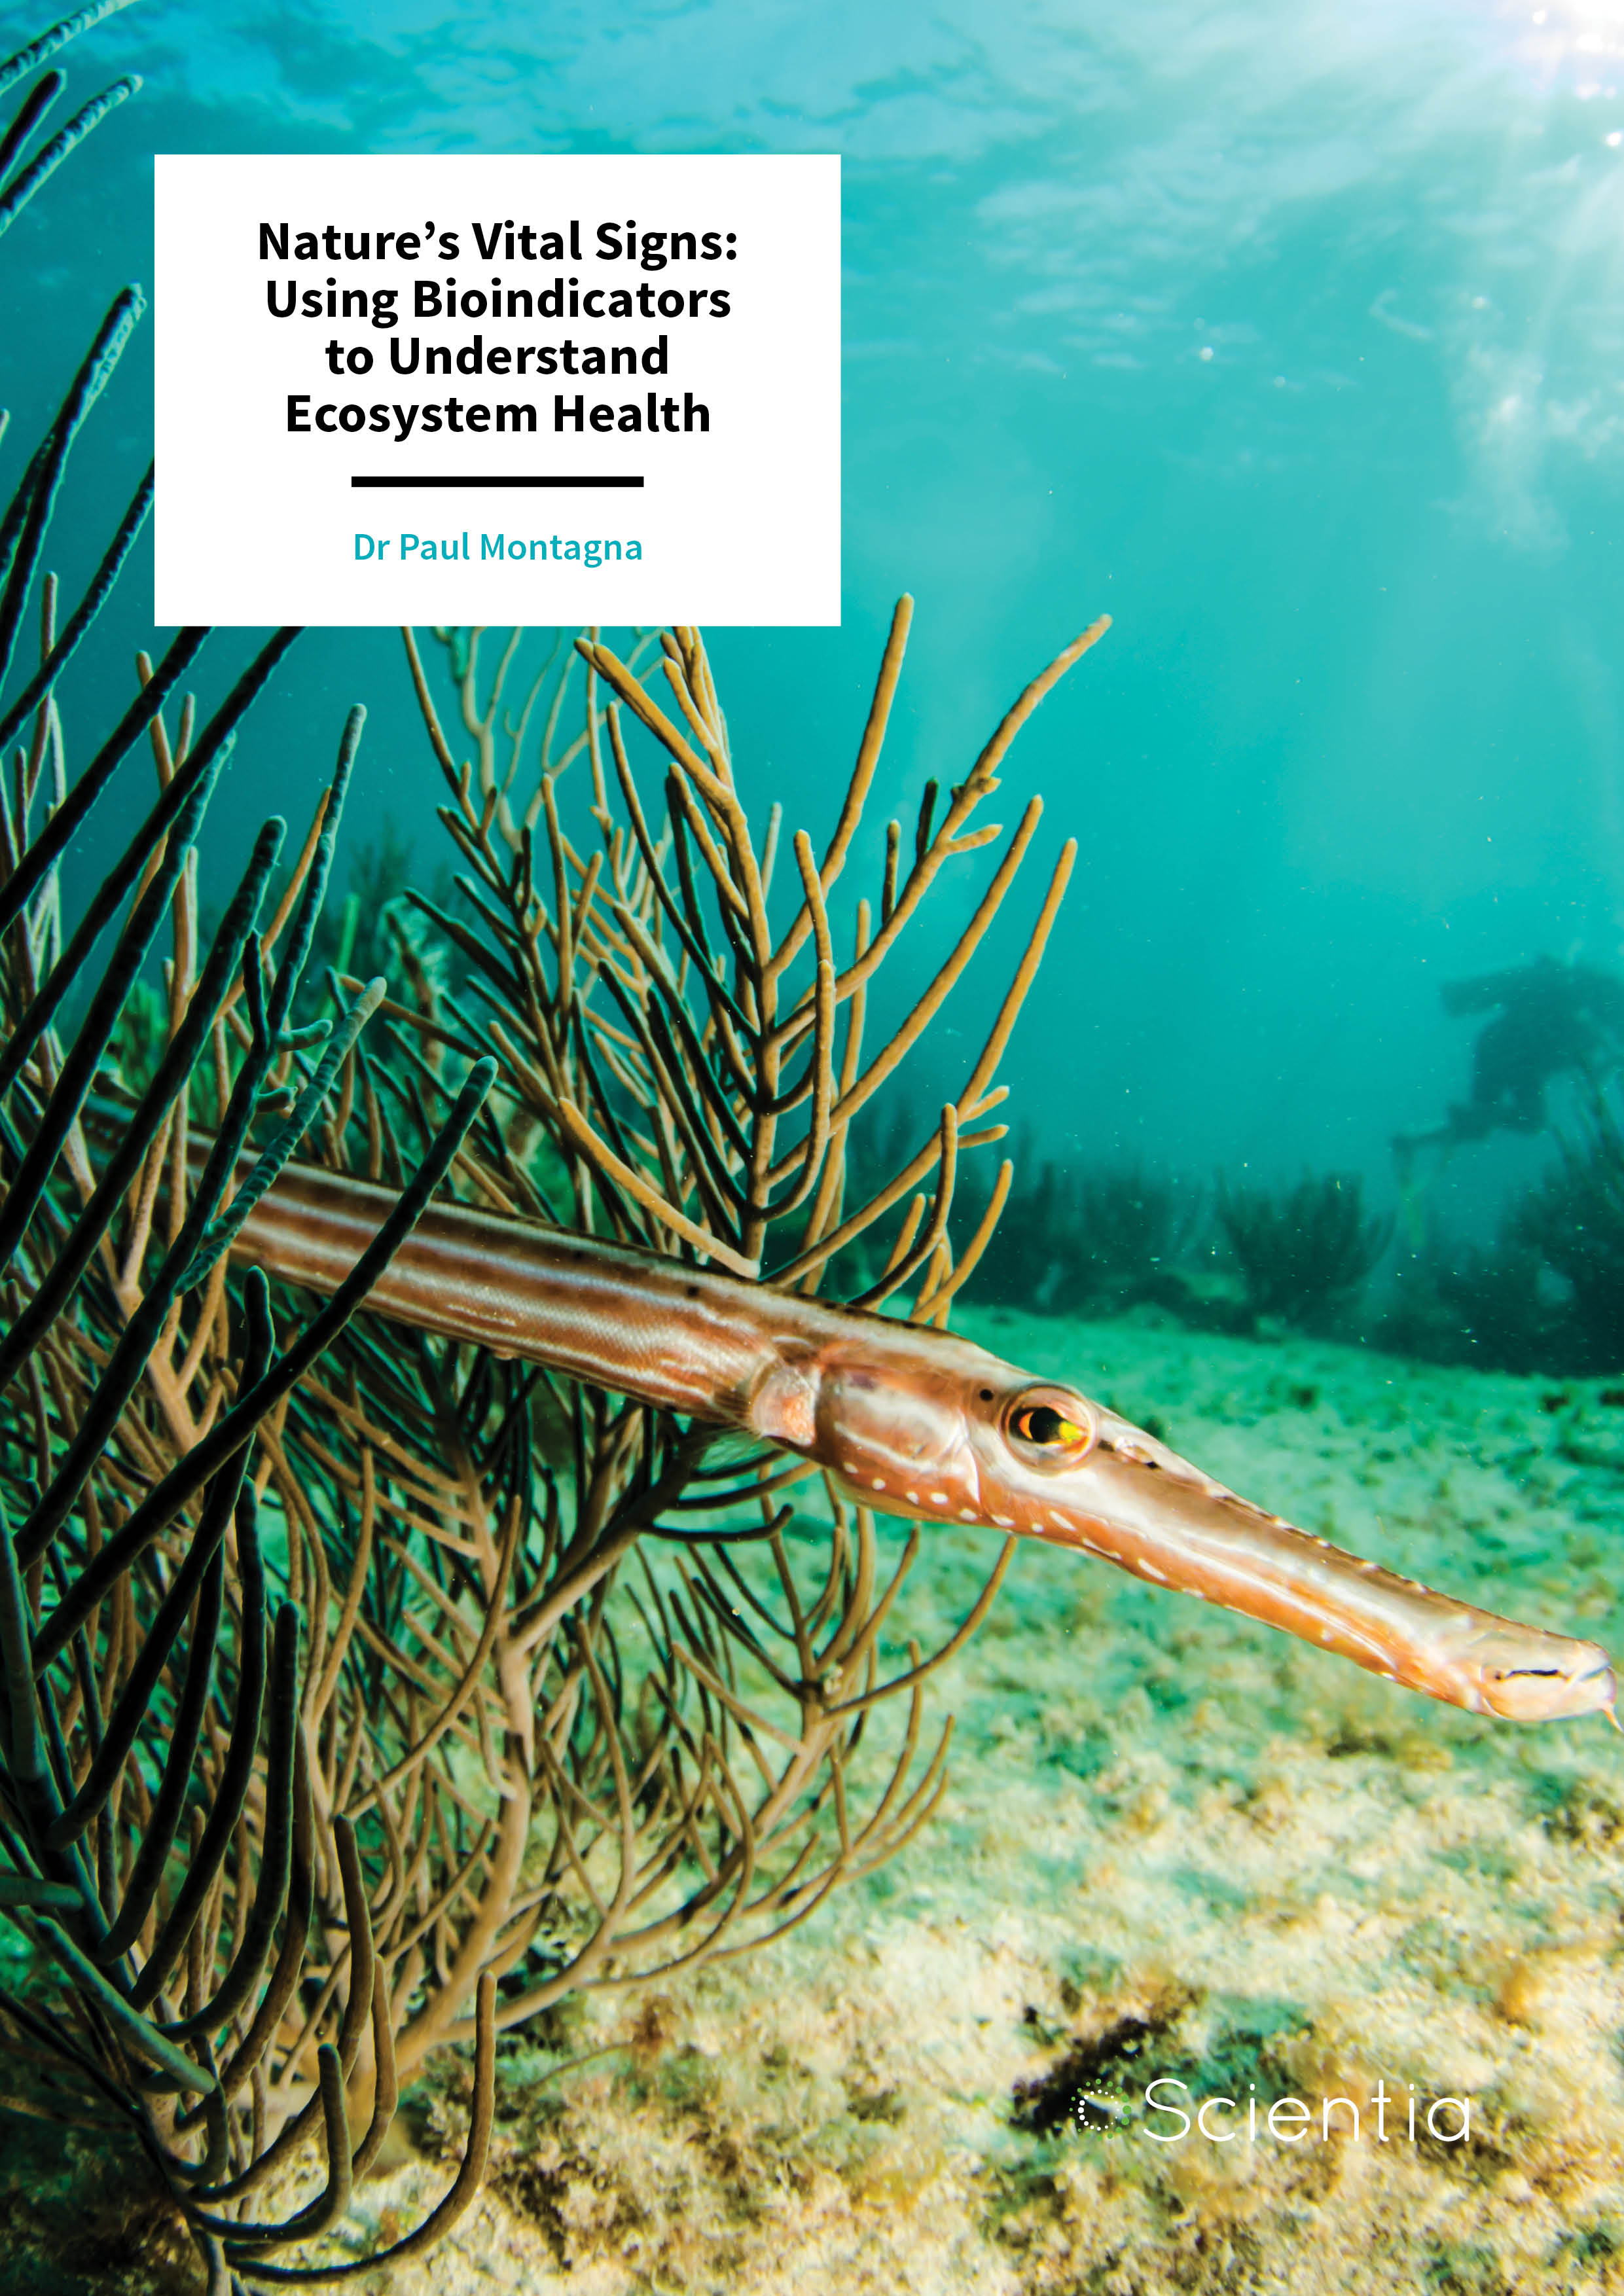 Dr Paul Montagna – Nature’s Vital Signs: Using Bioindicators to Understand Ecosystem Health